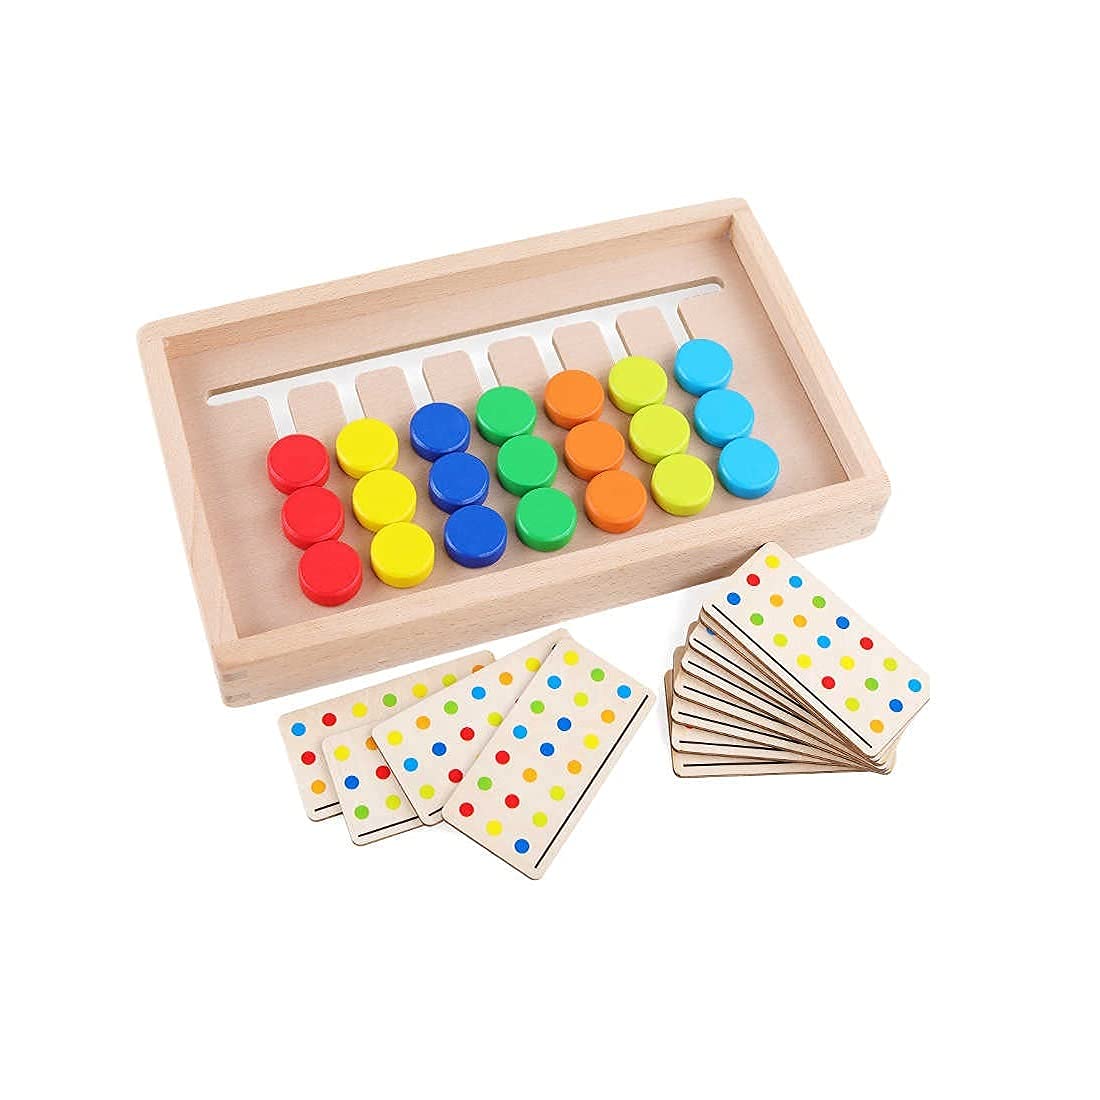 Seven Color Game - Color Matching Puzzle